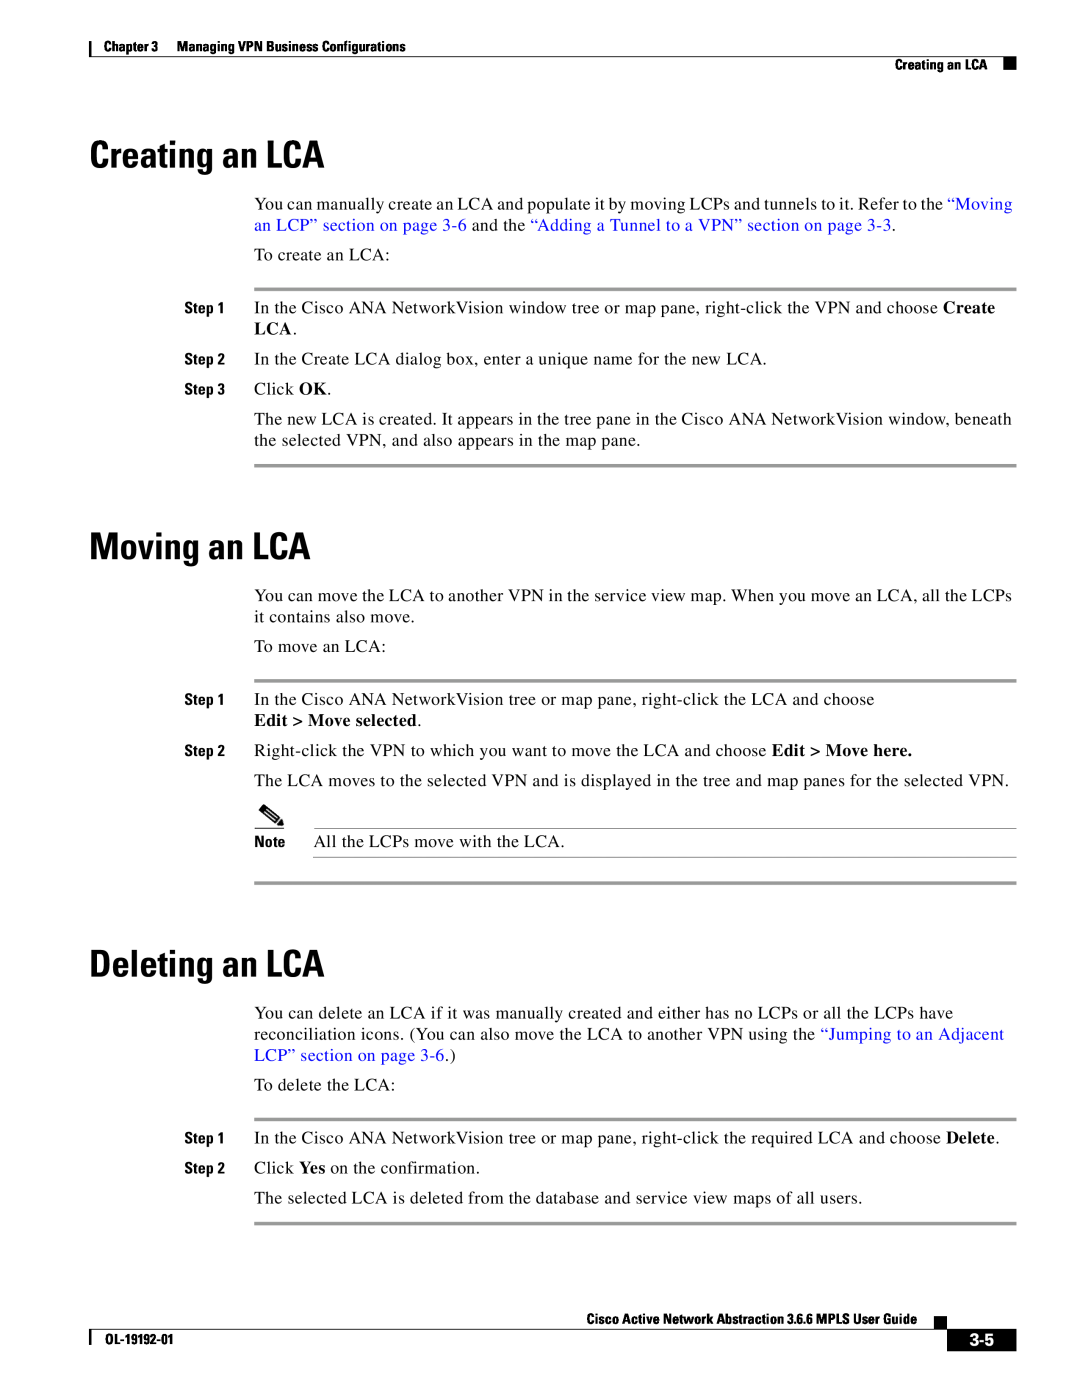 Cisco Systems 3.6.6 manual Creating an LCA, Moving an LCA, Deleting an LCA, Edit Move selected 